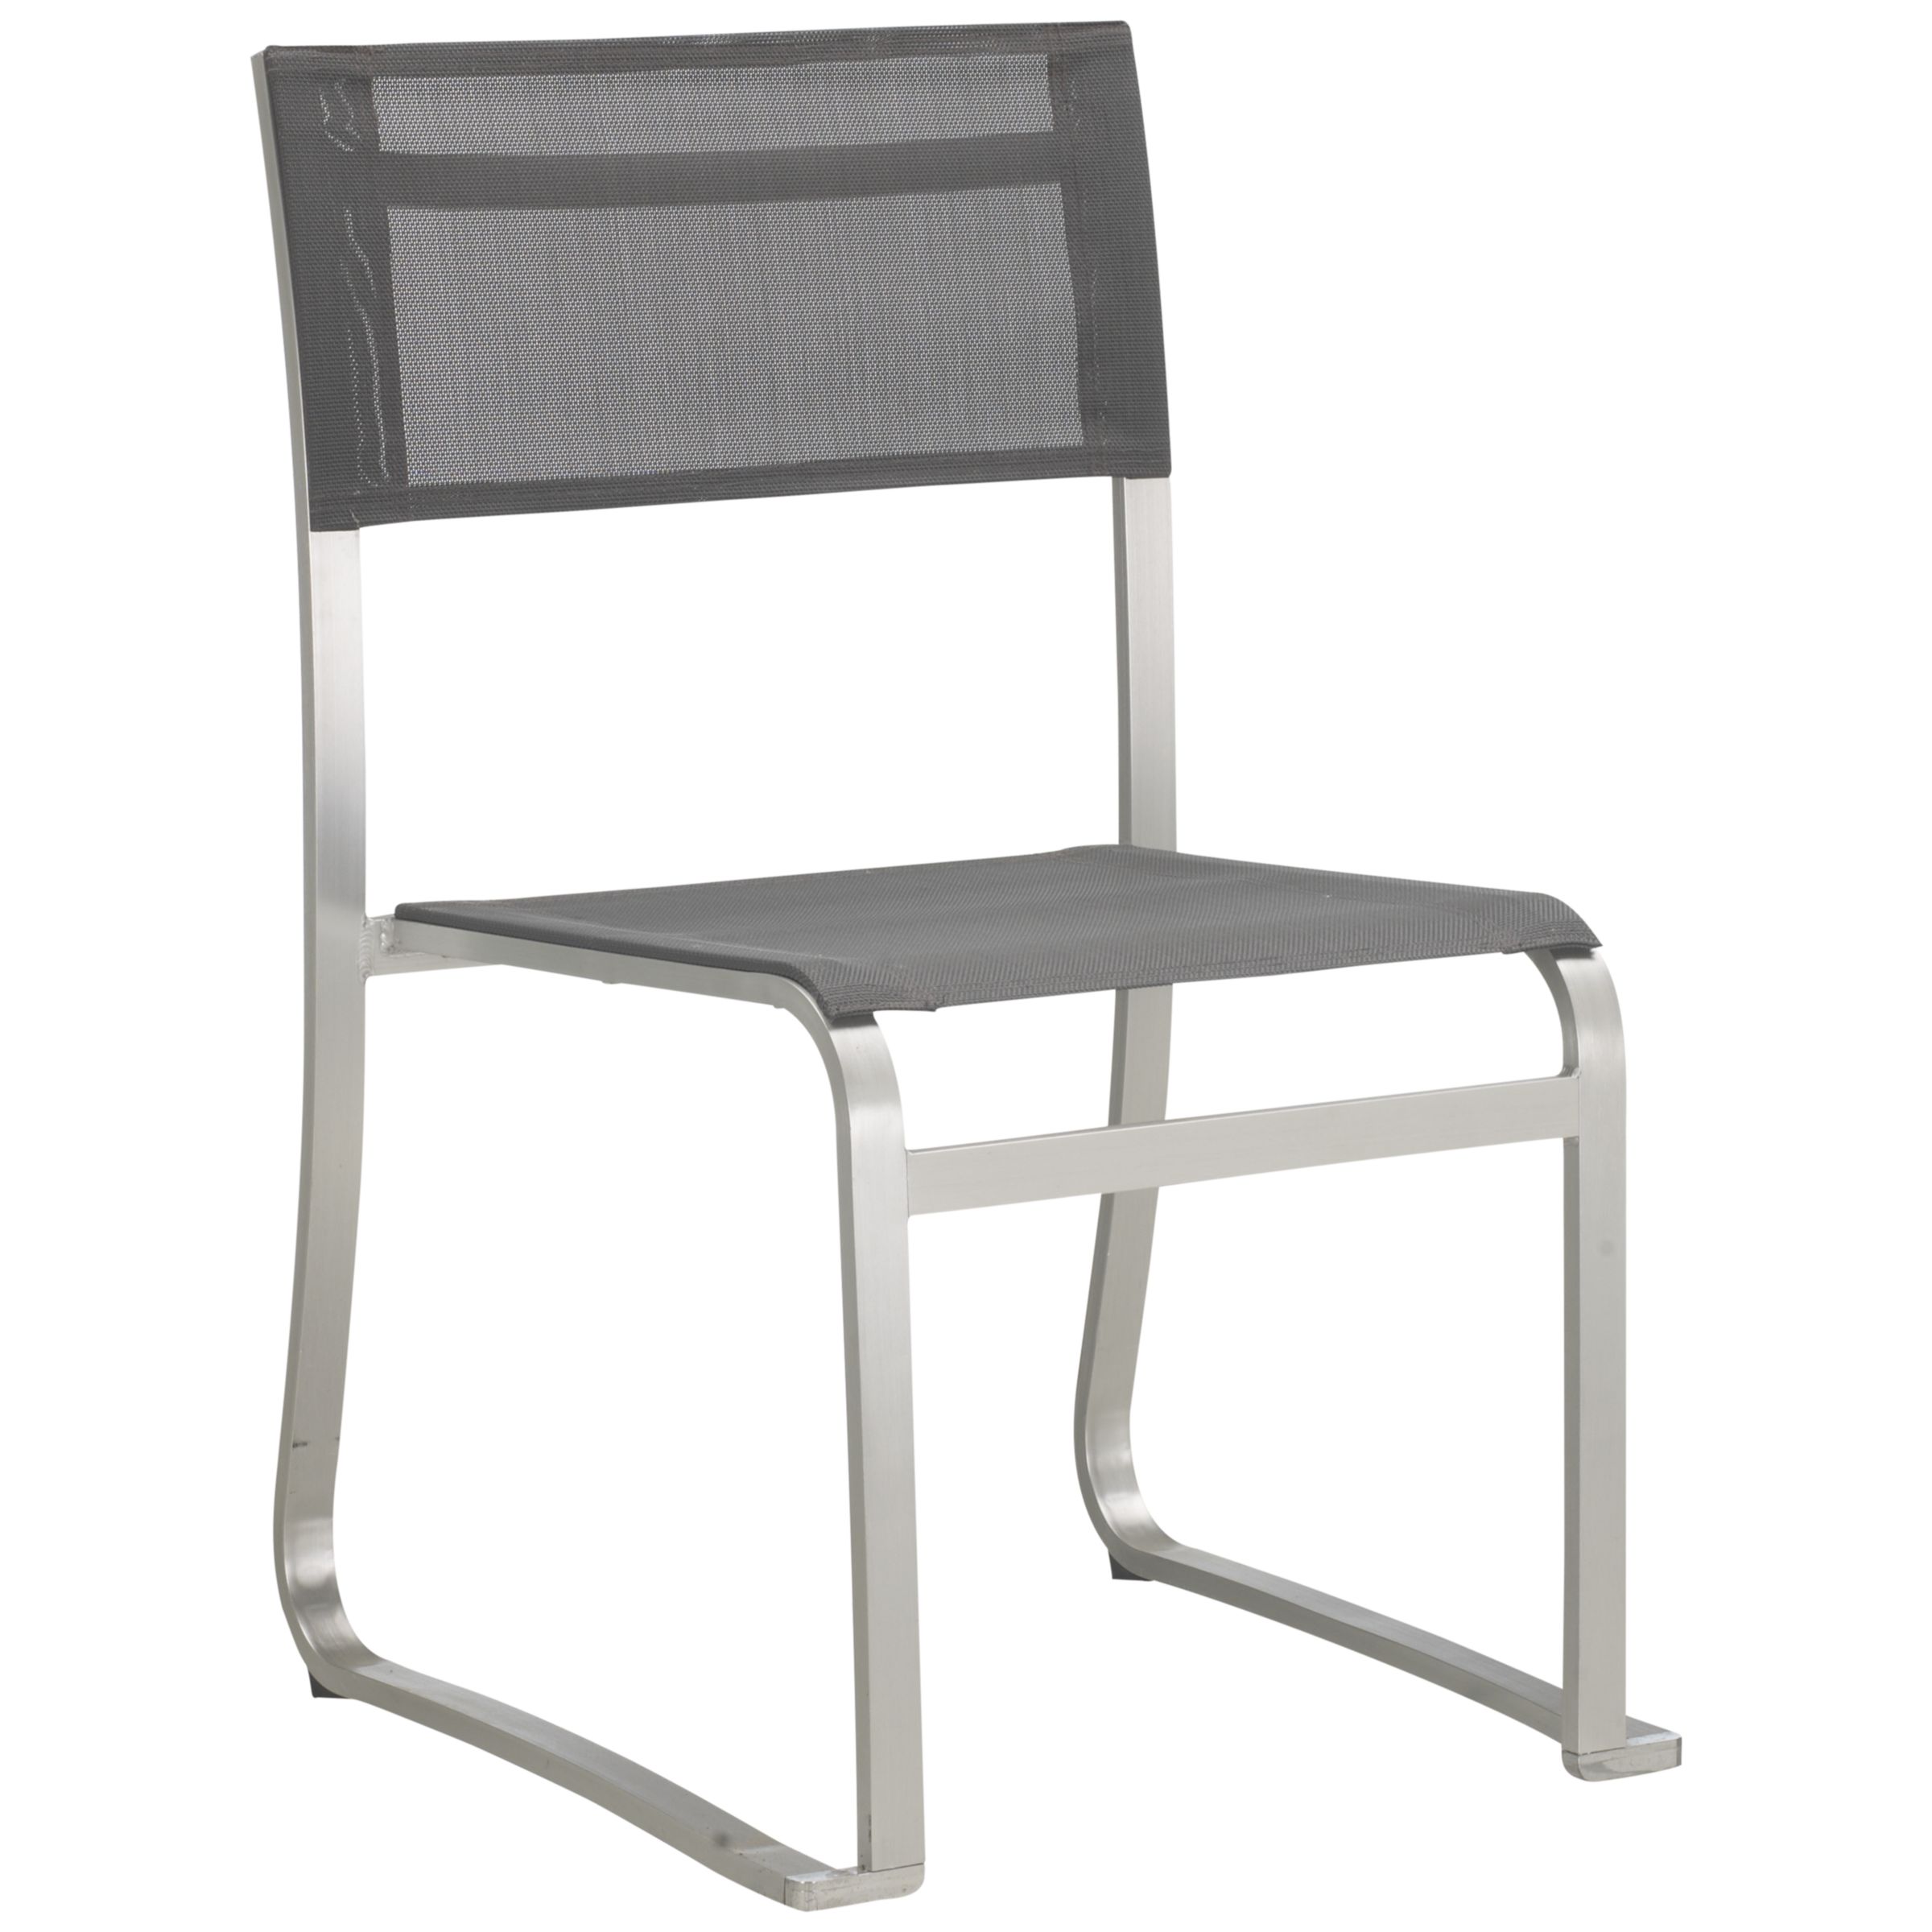 John Lewis Zone Outdoor Dining Chair